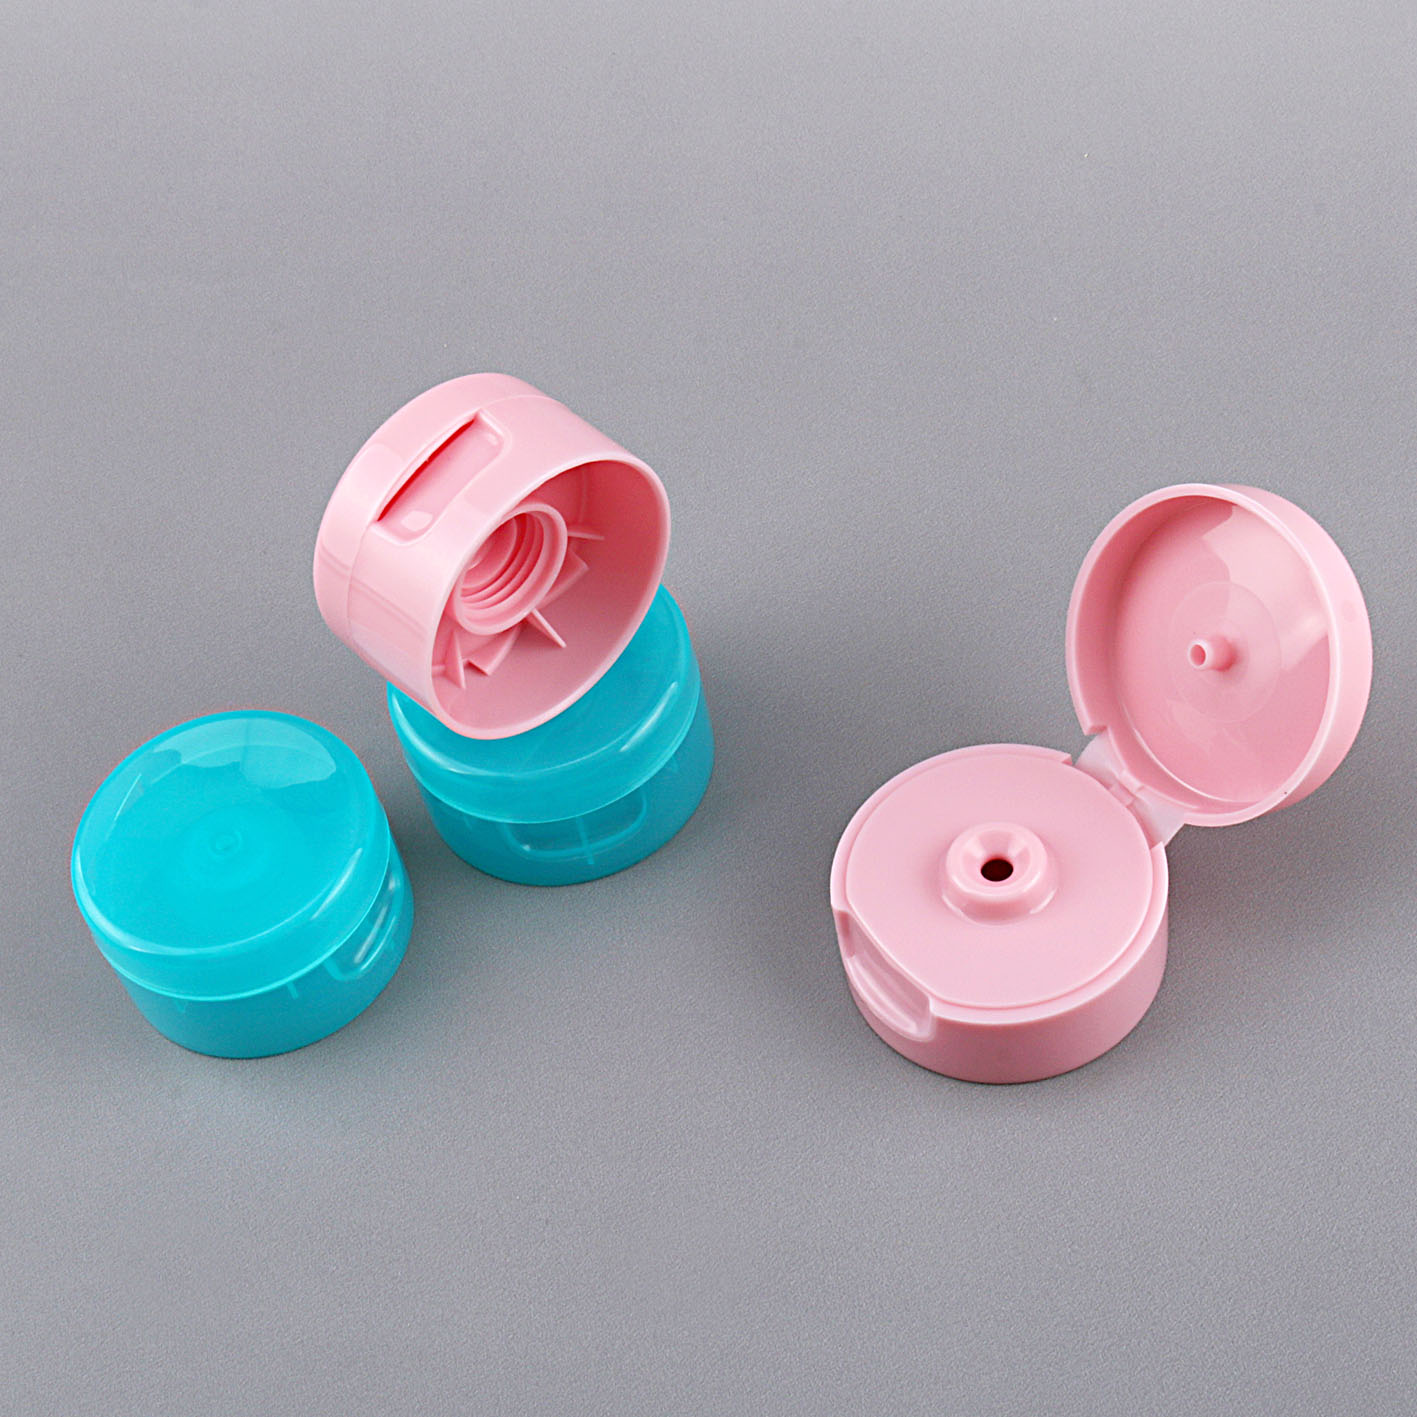 40mm_Diameter_Customized_Cleanser_Tubes_with_Glossy_Flip_Top_Caps1